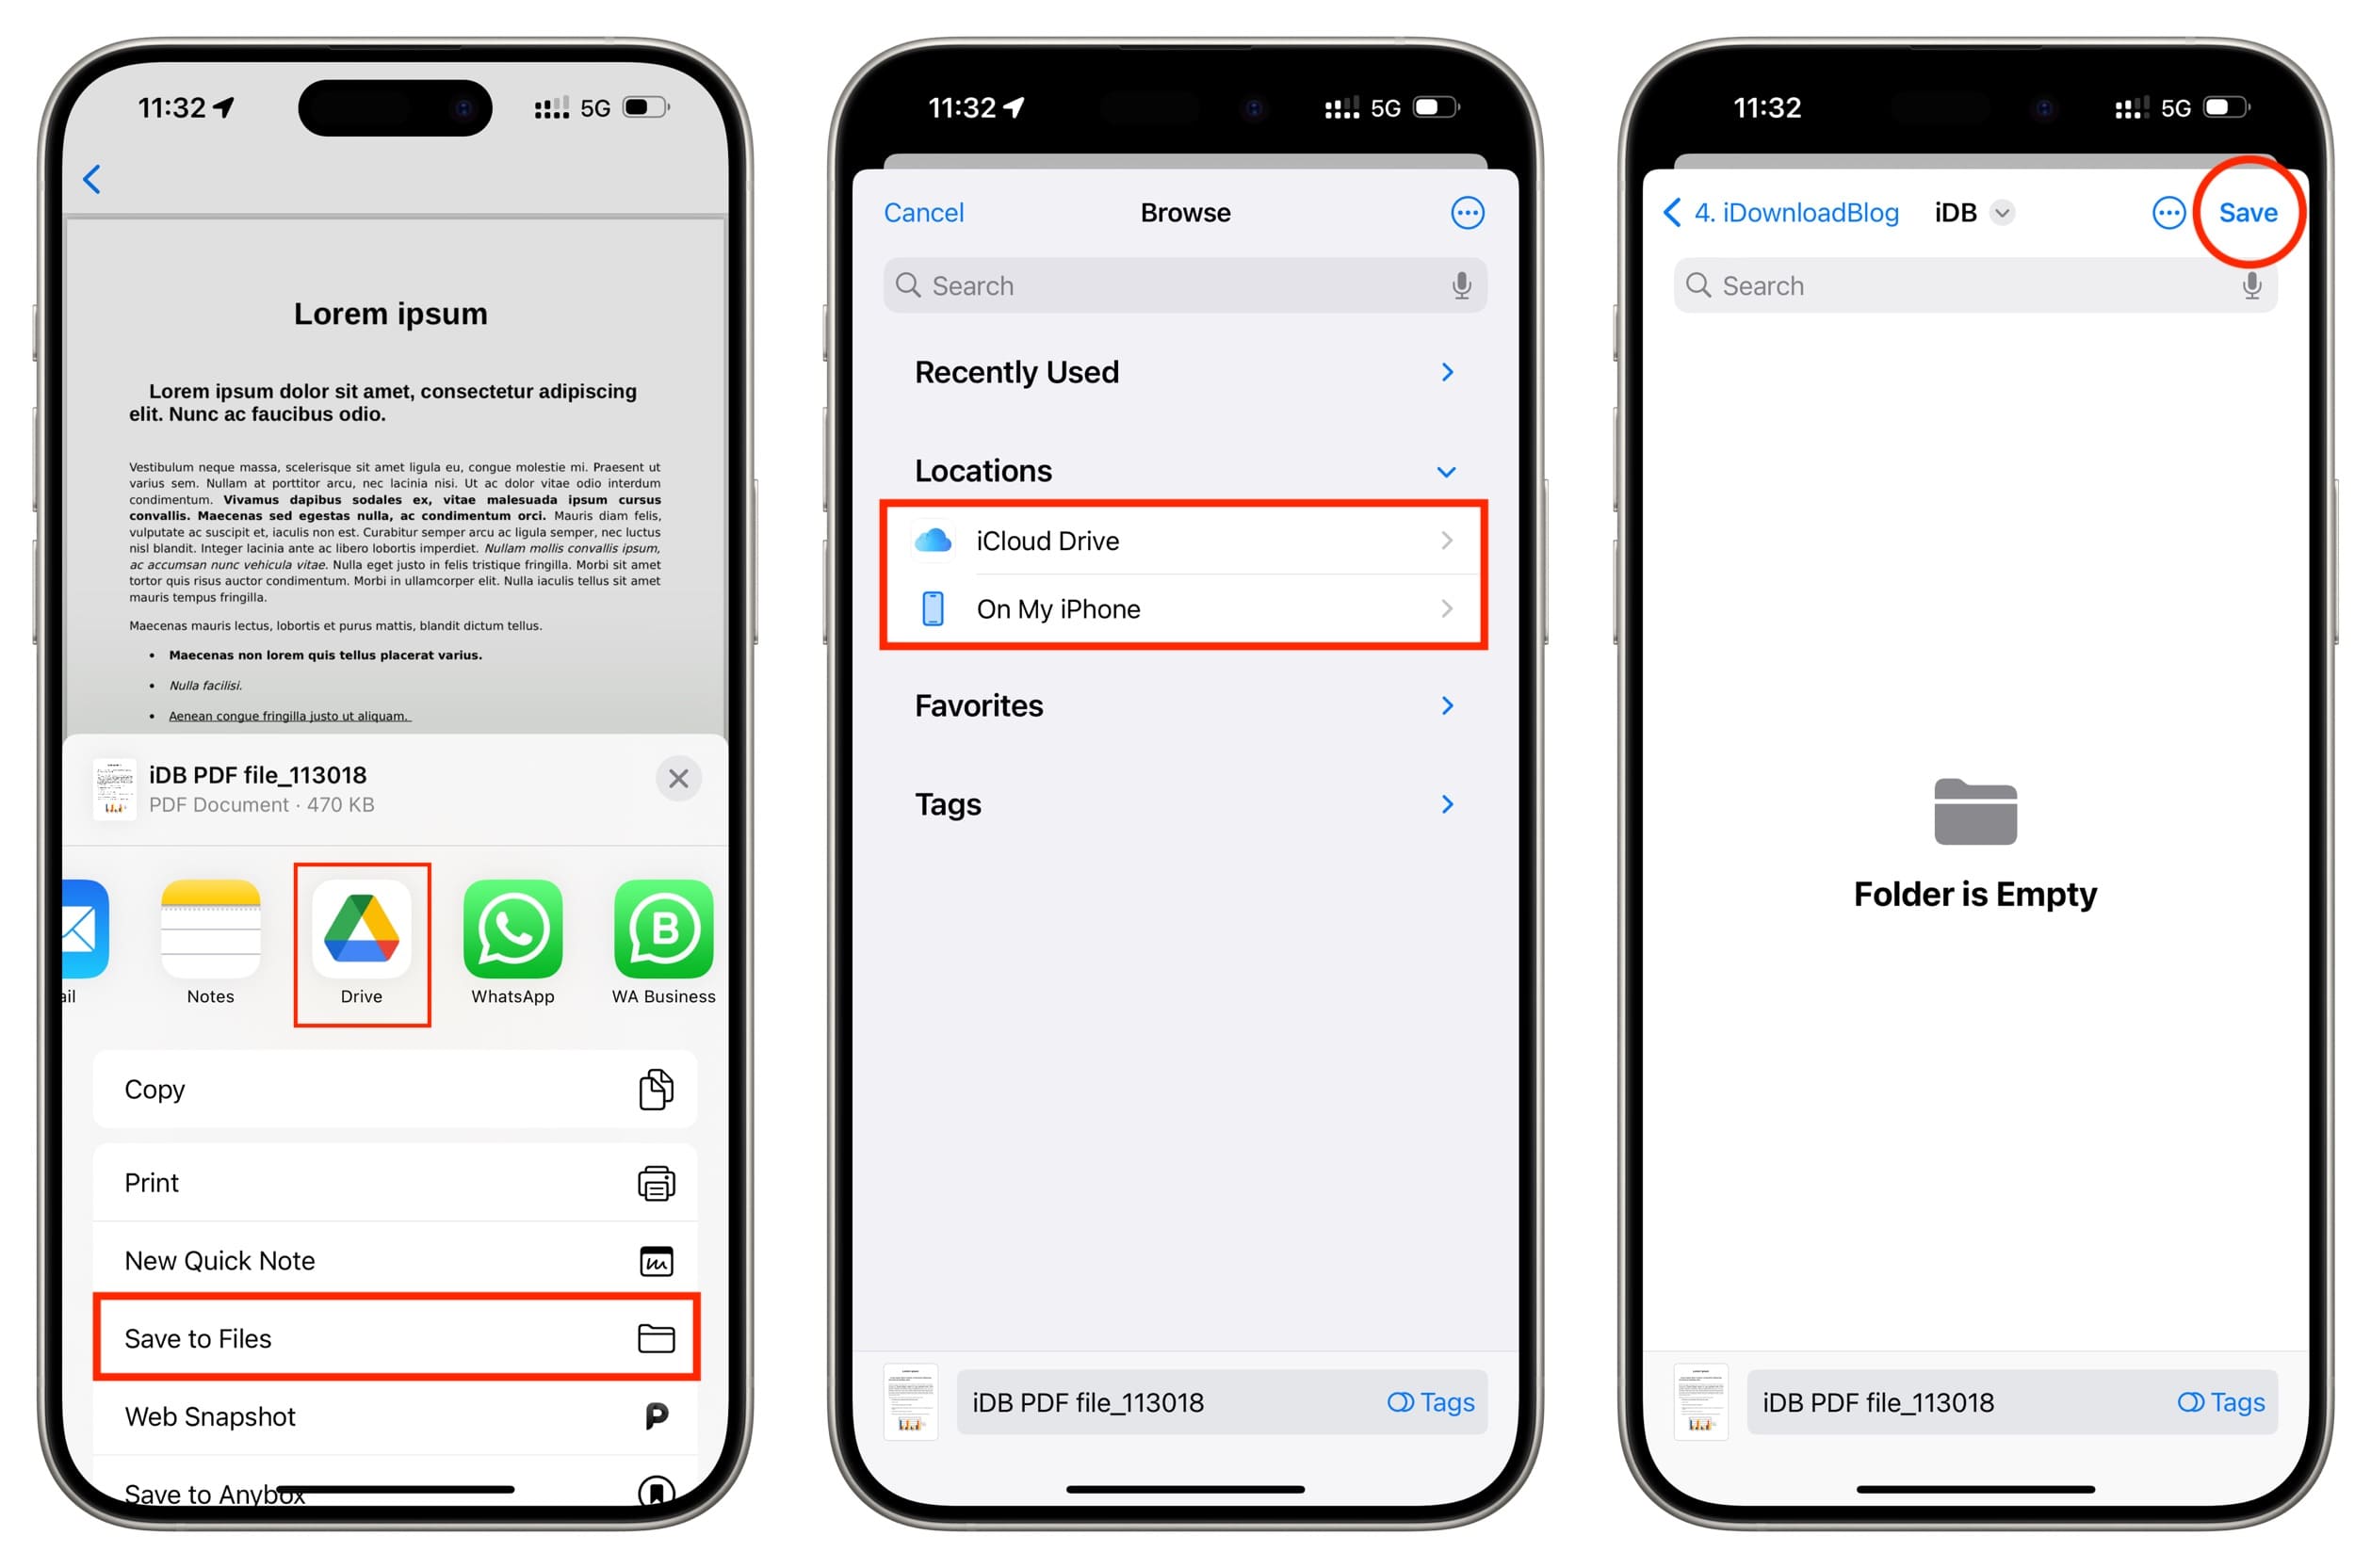 Select Save to Files iCloud Drive and hit Save to save WhatsApp PDF